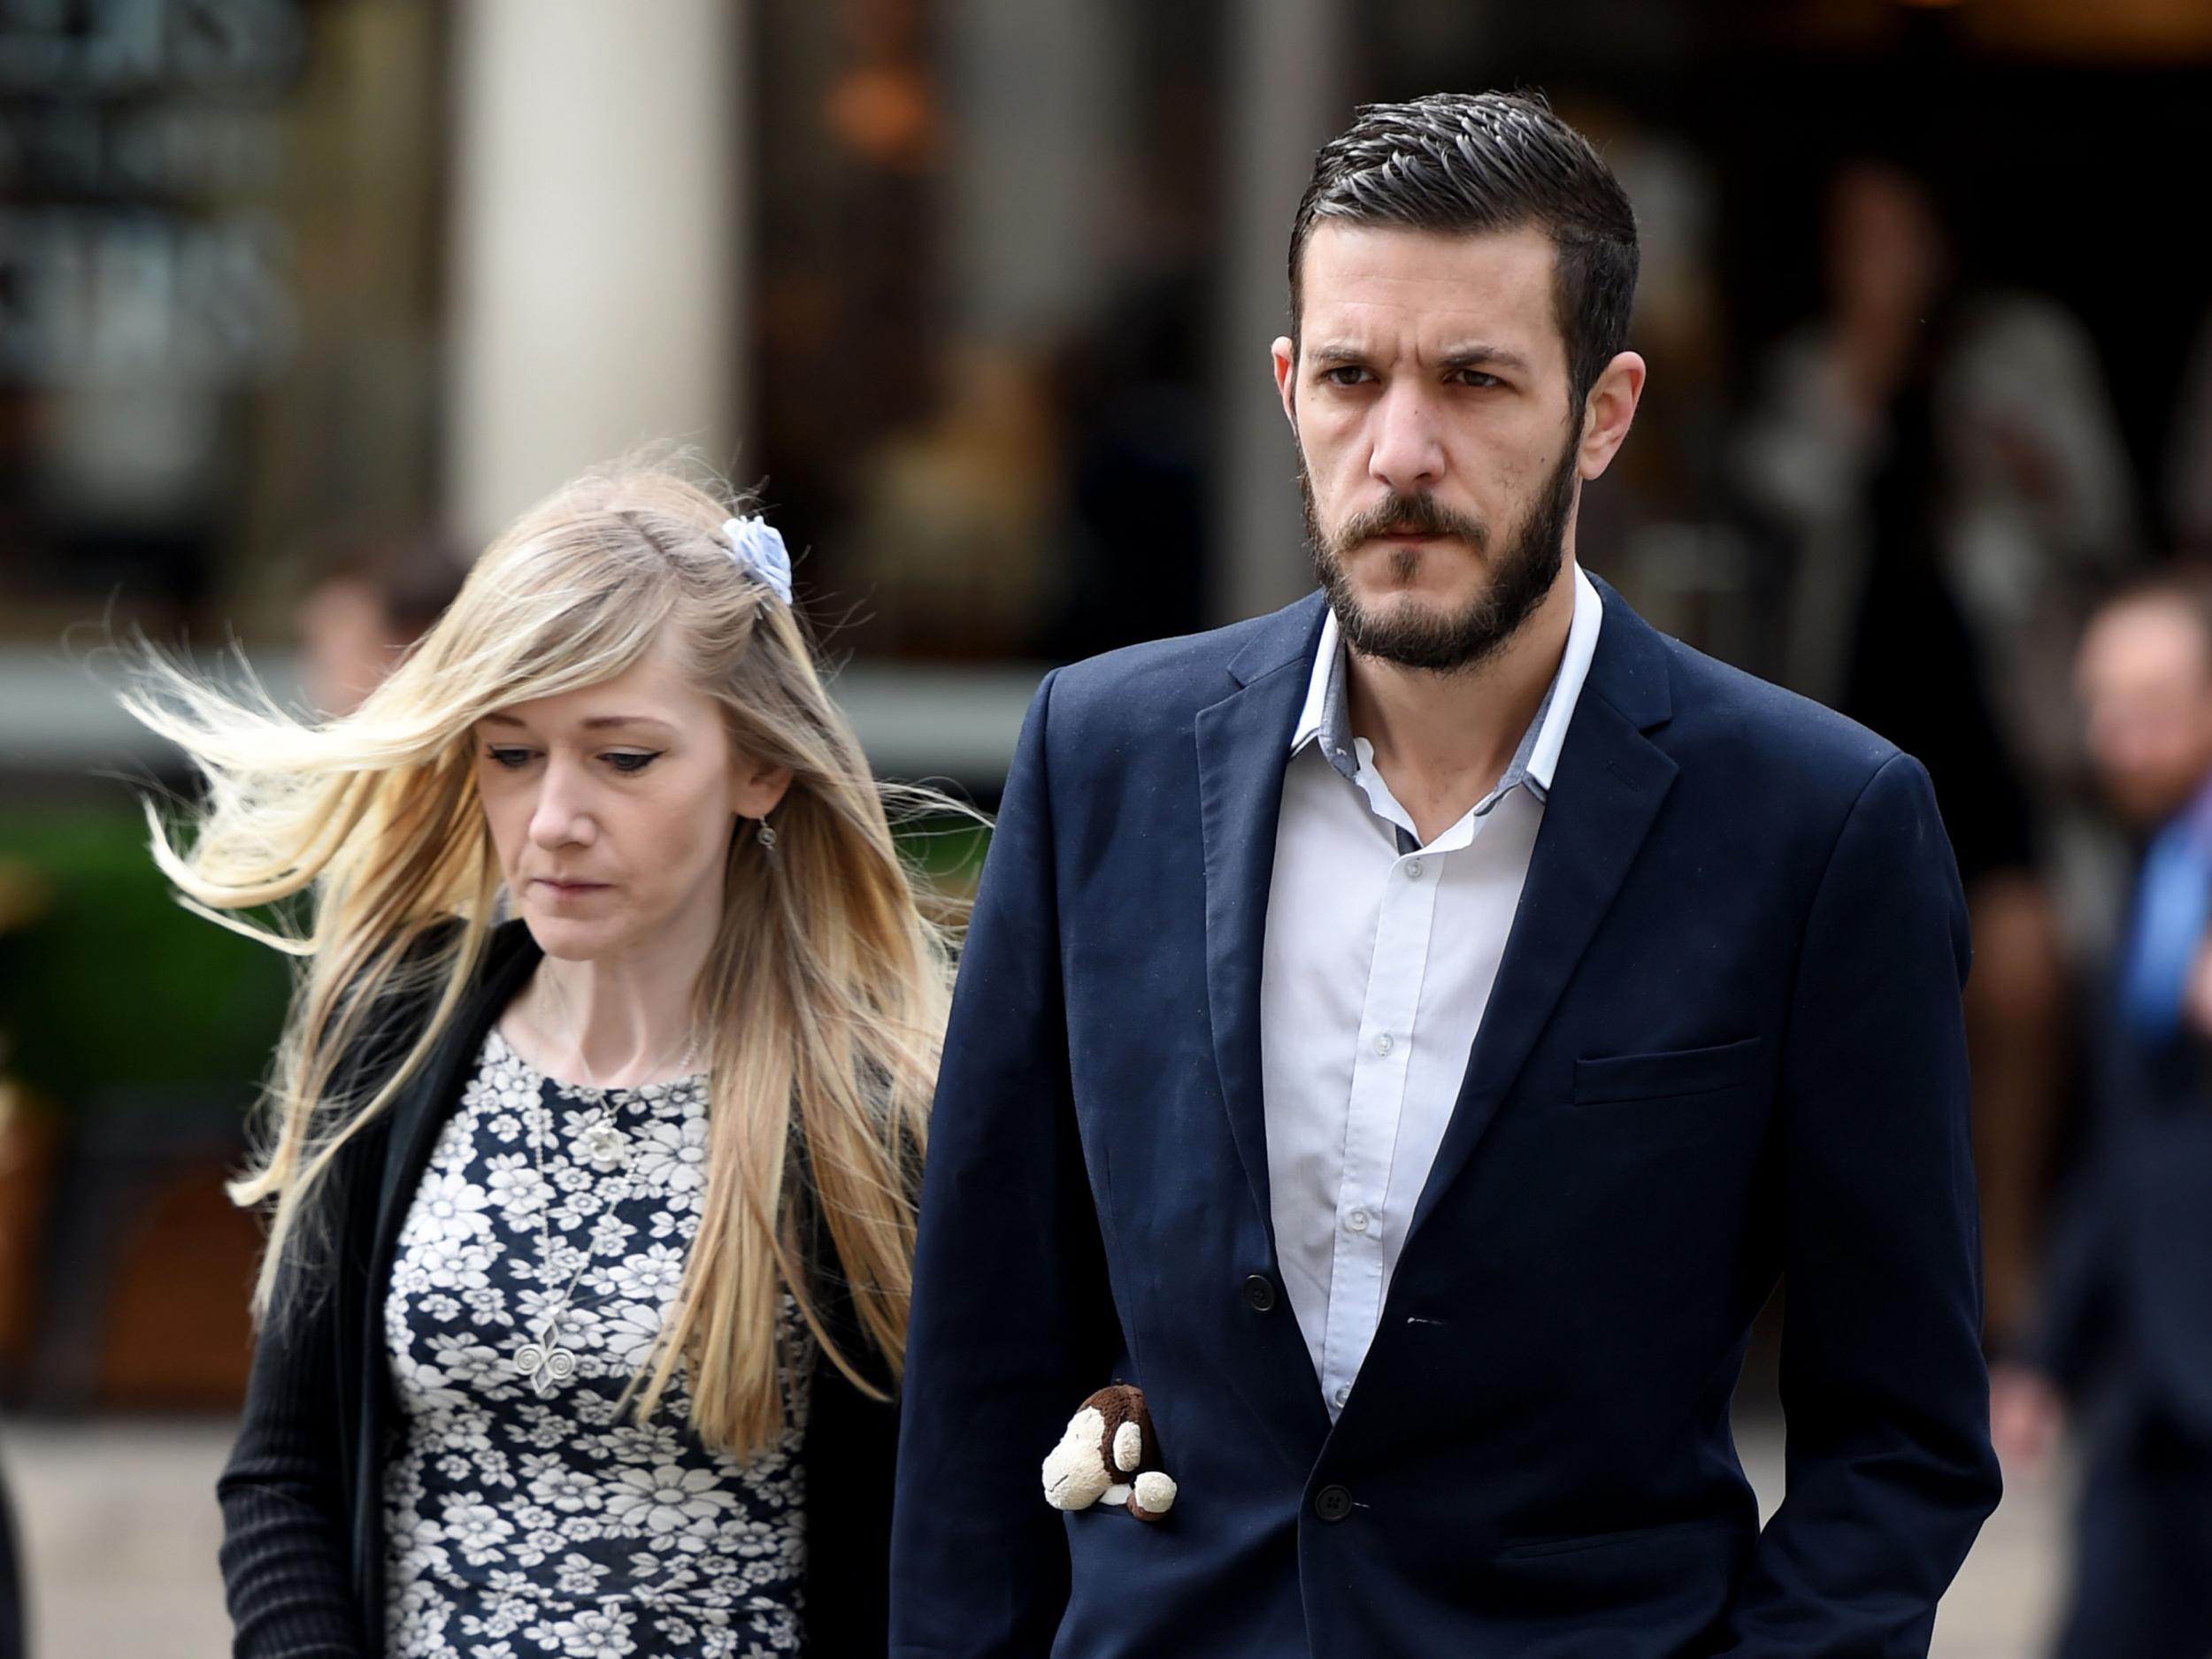 Charlie Gard's parents Connie Yates and Chris Gard arrive at the Royal Courts of Justice this morning